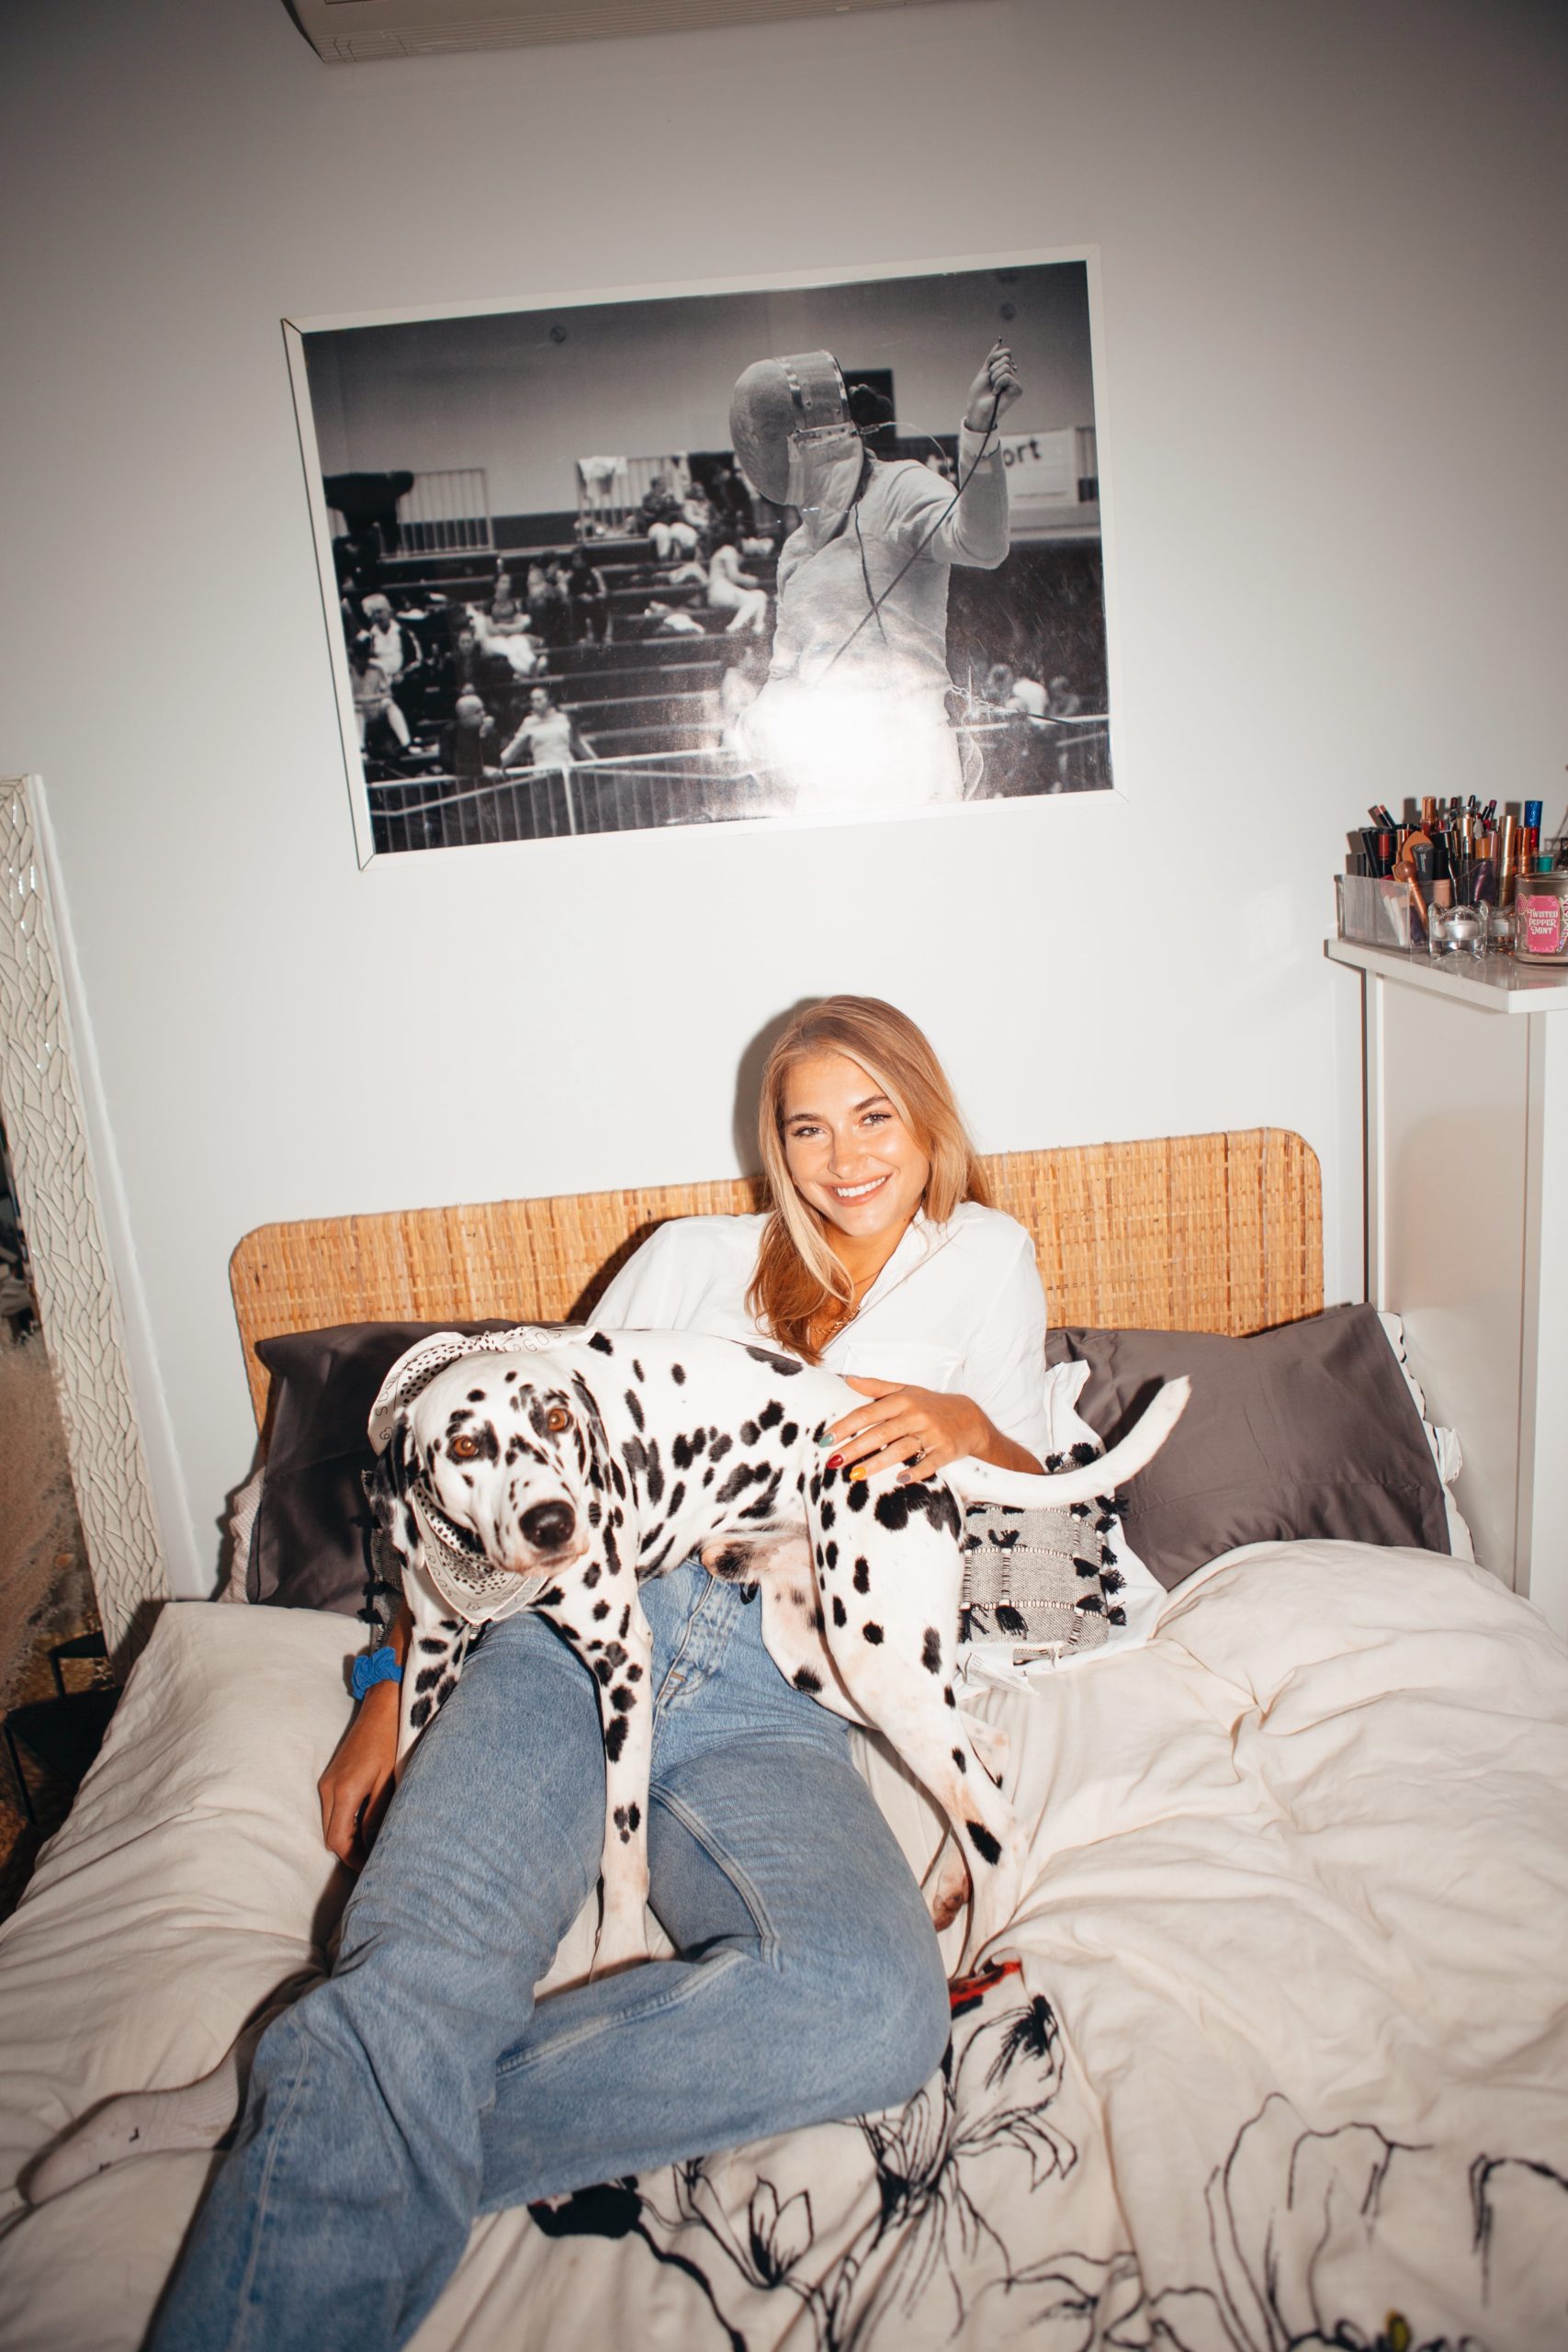 Olympic saber fencer, Monika Aksamit, and Pongo the Dalmatian, photographed for Argos & Artemis by Tayler Smith.